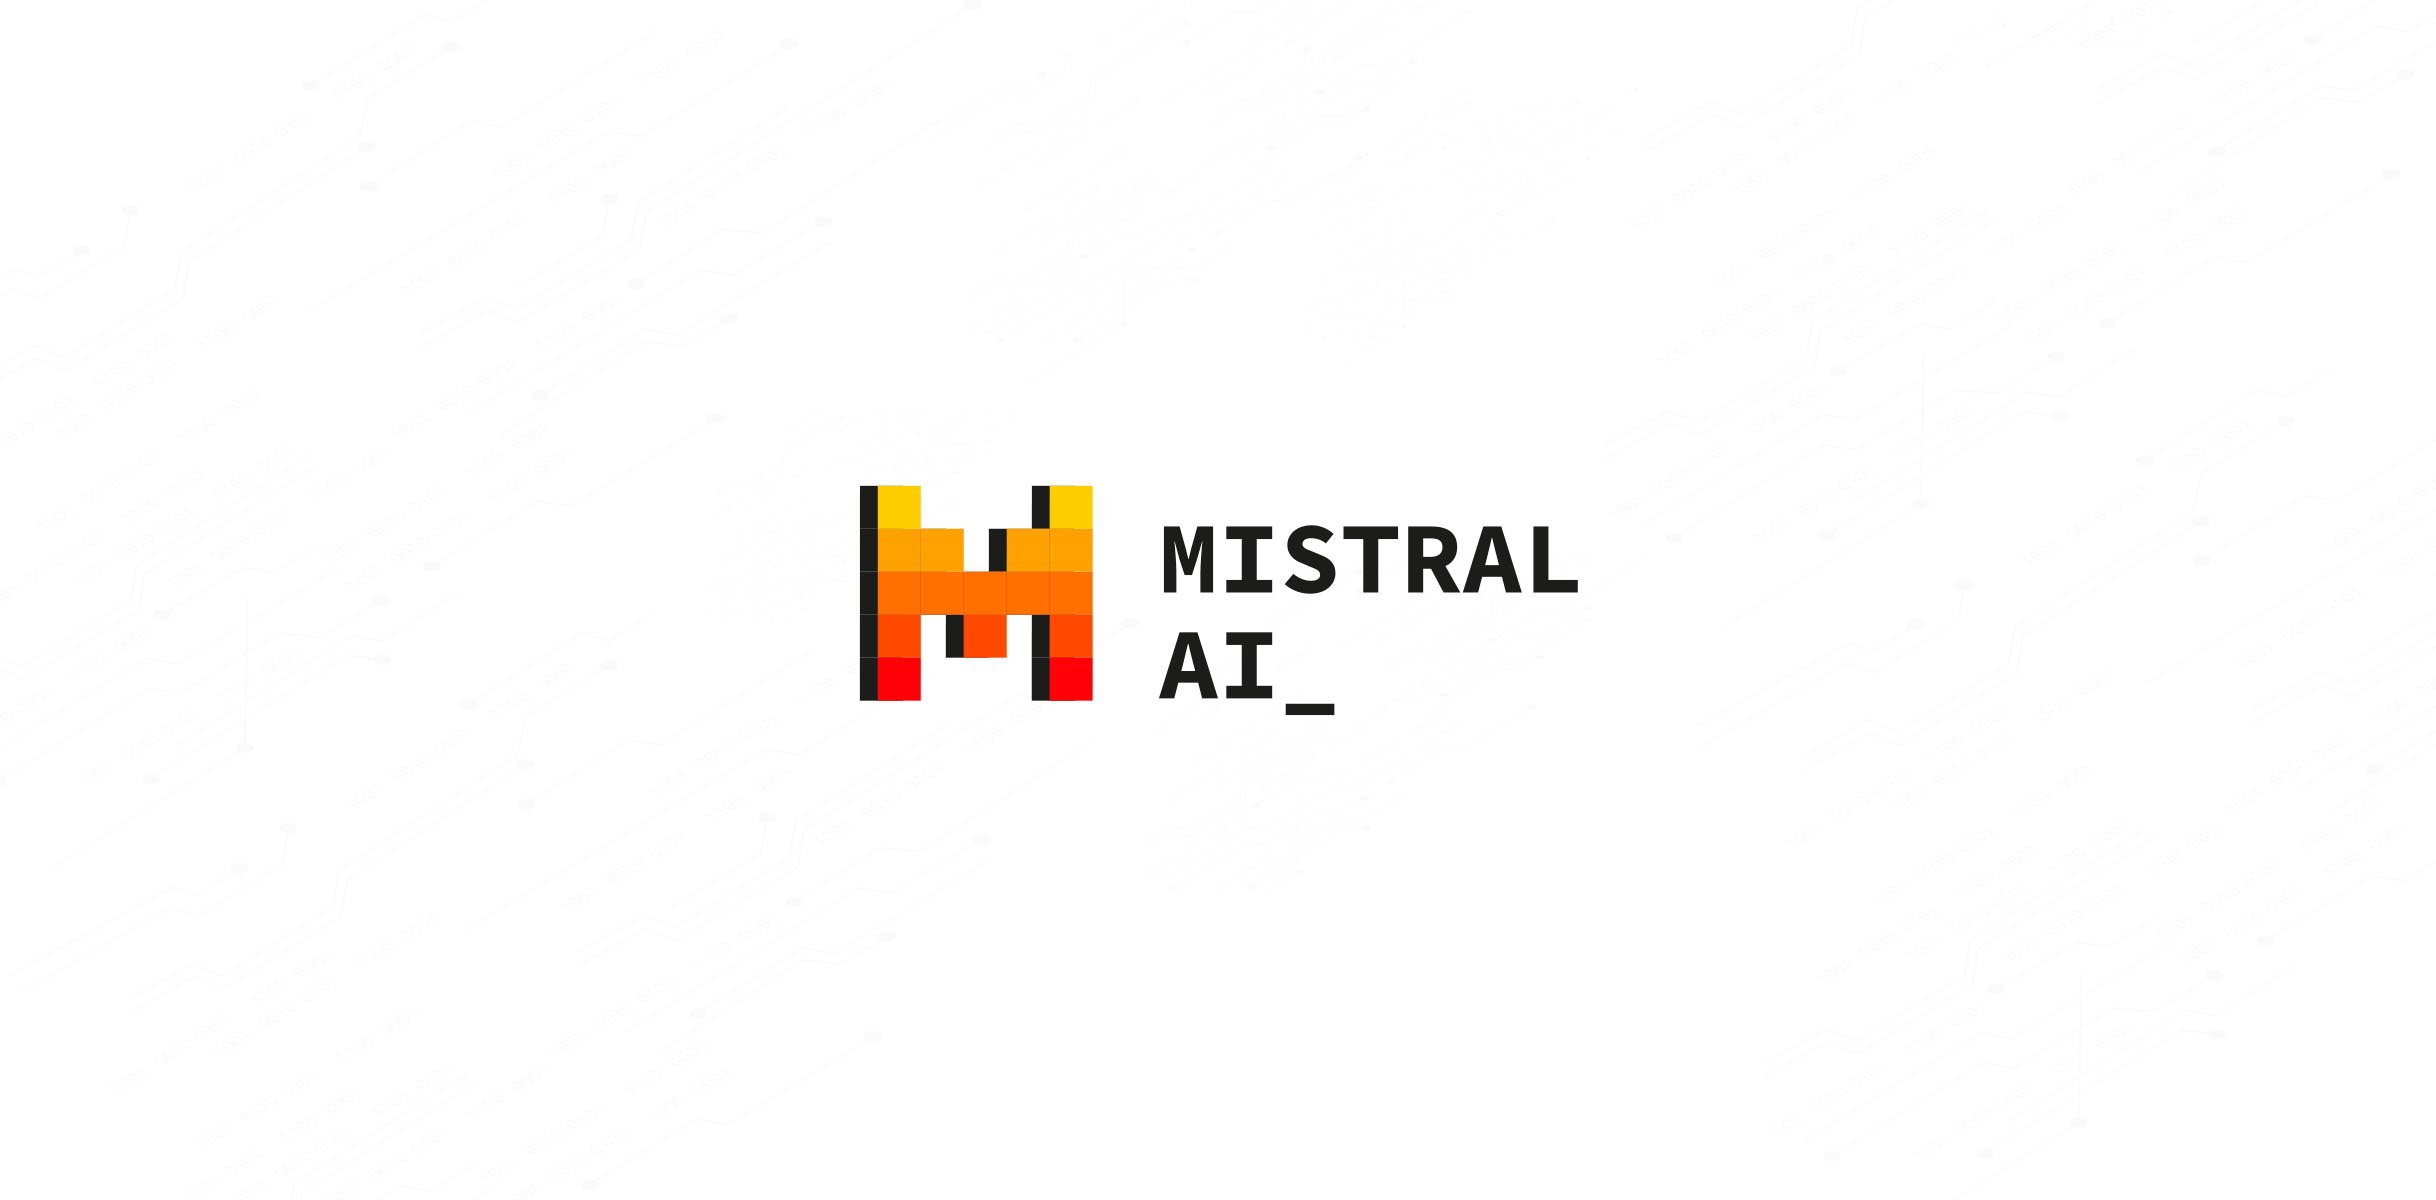 The Rise of Mistral AI: How This European Startup Is Challenging OpenAI